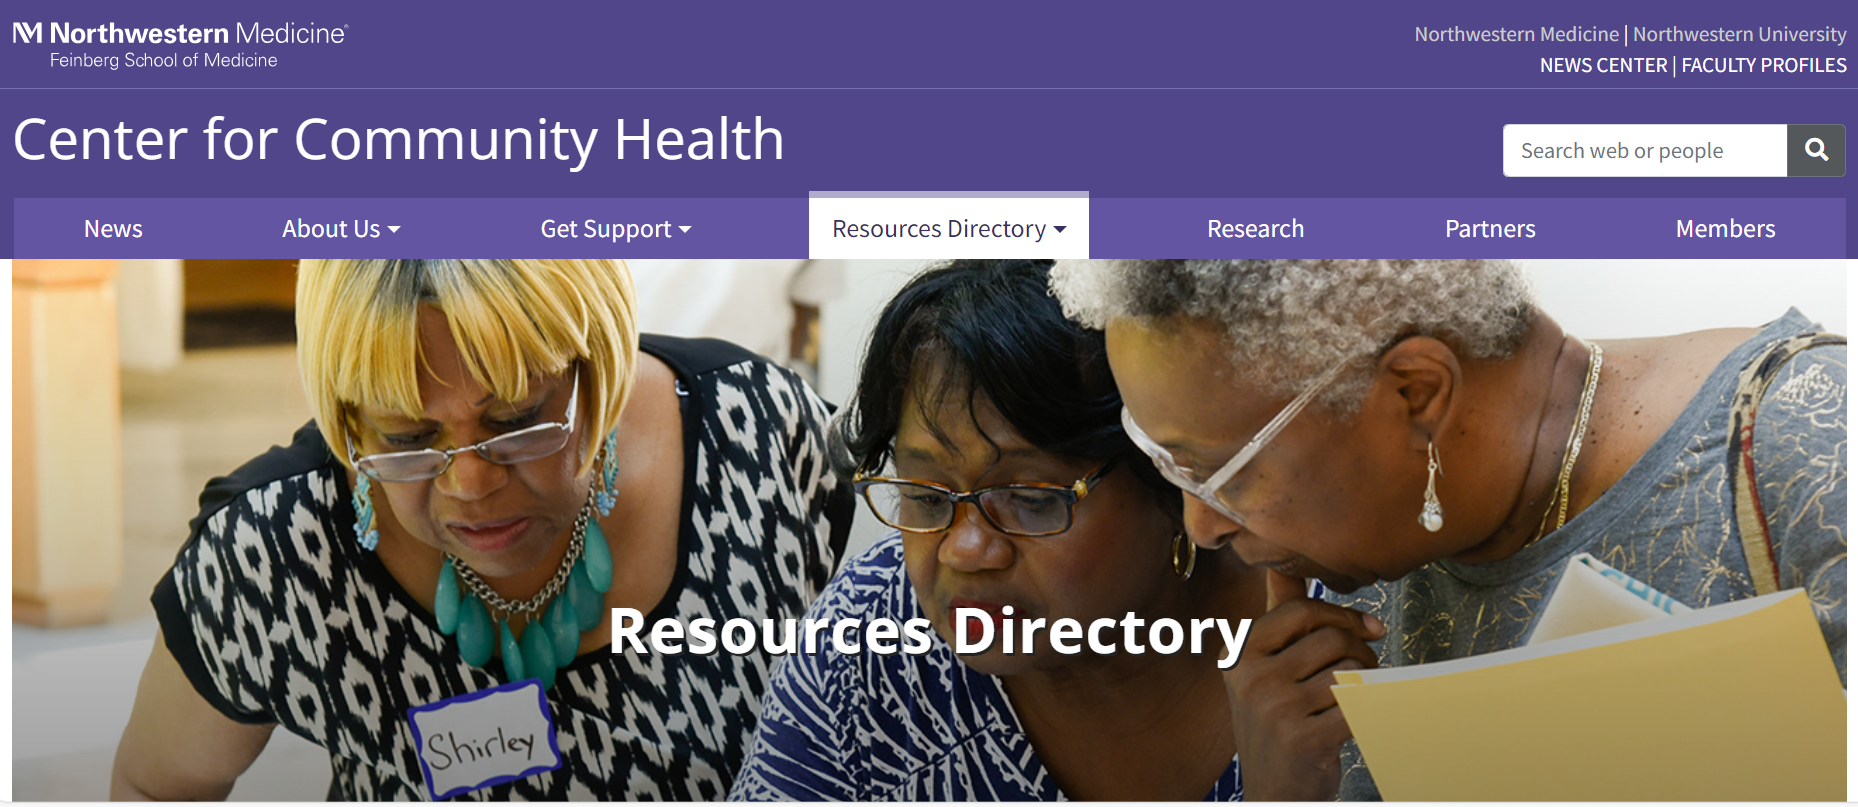 Website homepage displays three Black women working together, under text reading "Resources Directory."